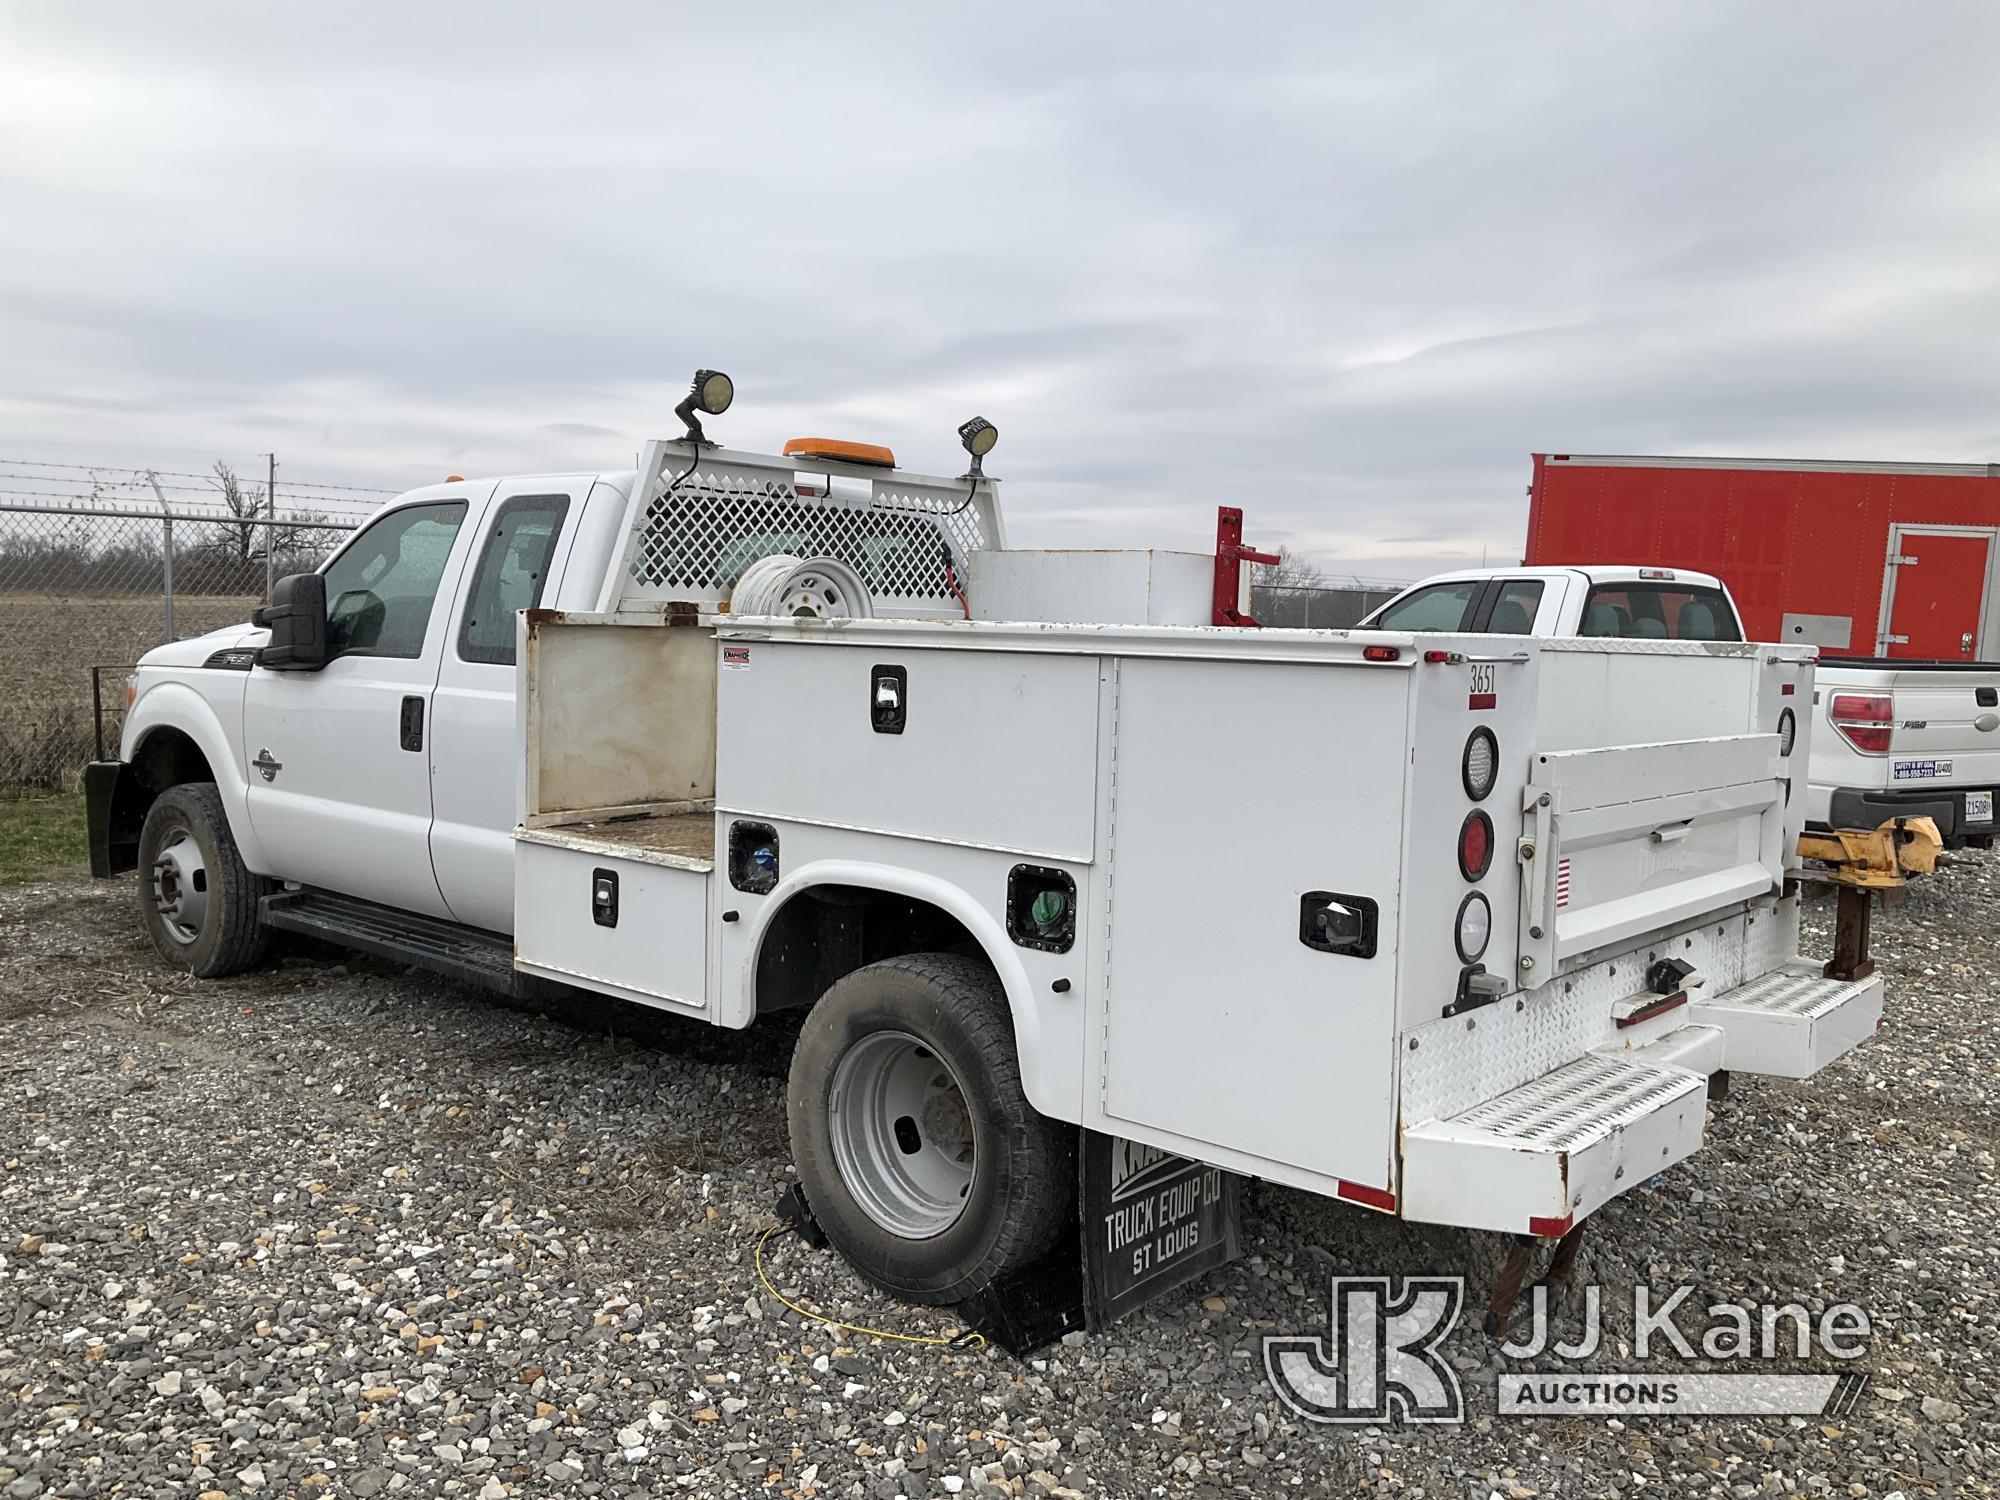 (Hawk Point, MO) 2014 Ford F350 4x4 Extended-Cab Service Truck Not Running, Condition Unknown, Parts